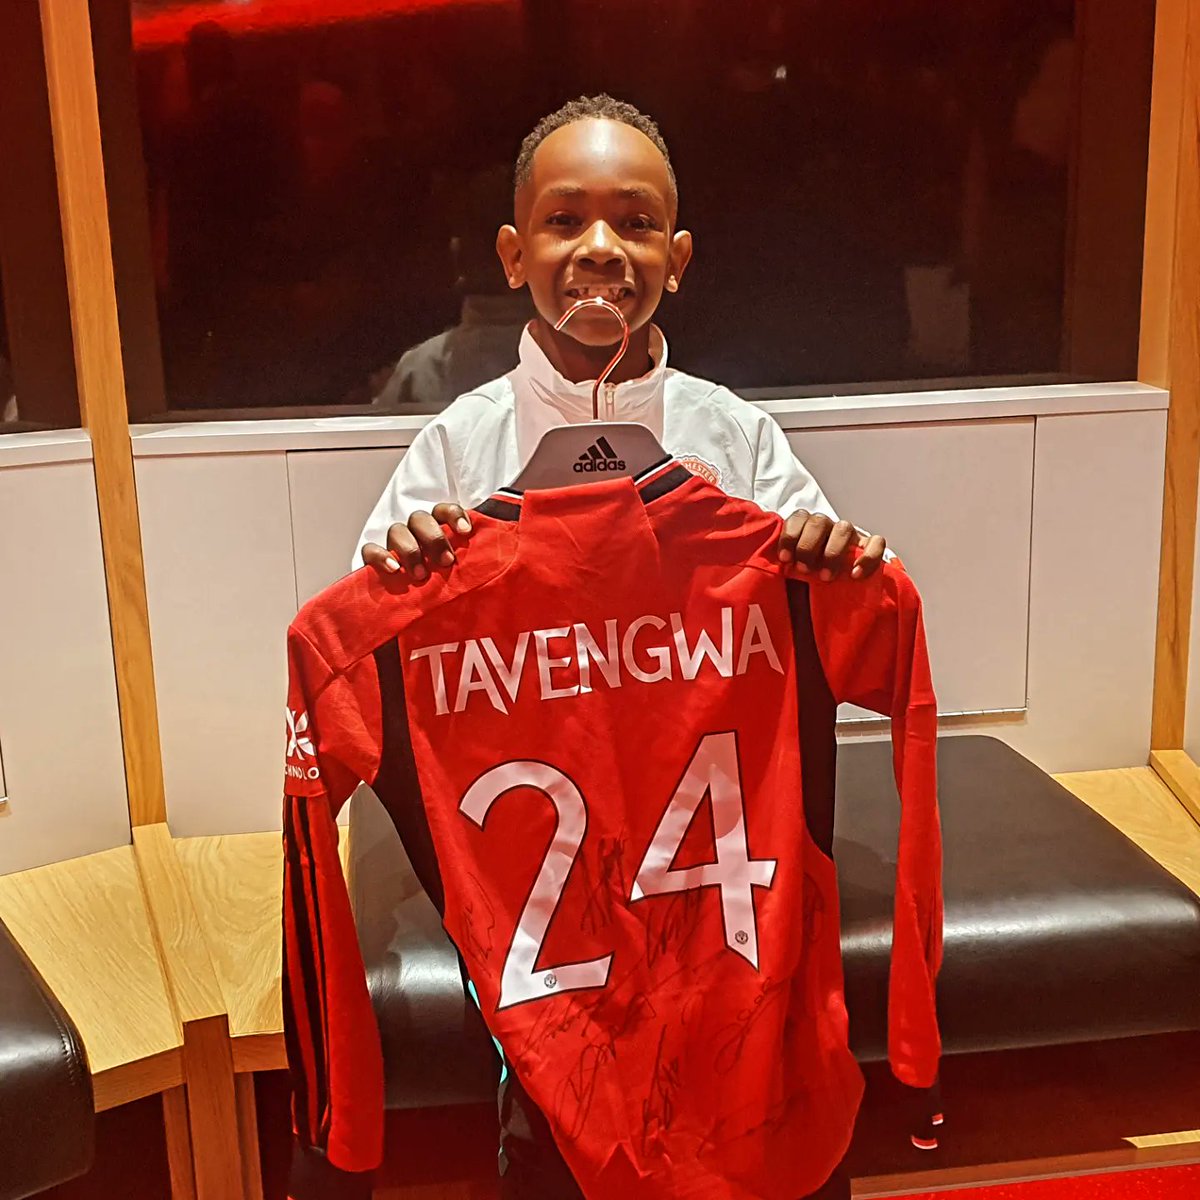 We are proud to announce that two members of our U8 Eagles have officially signed for the prestigious @ManUtd academy.. Temi and Josh were joined by their families and our coaching staff for the signing event held at Old Trafford Stadium. 🔴🟡🟢